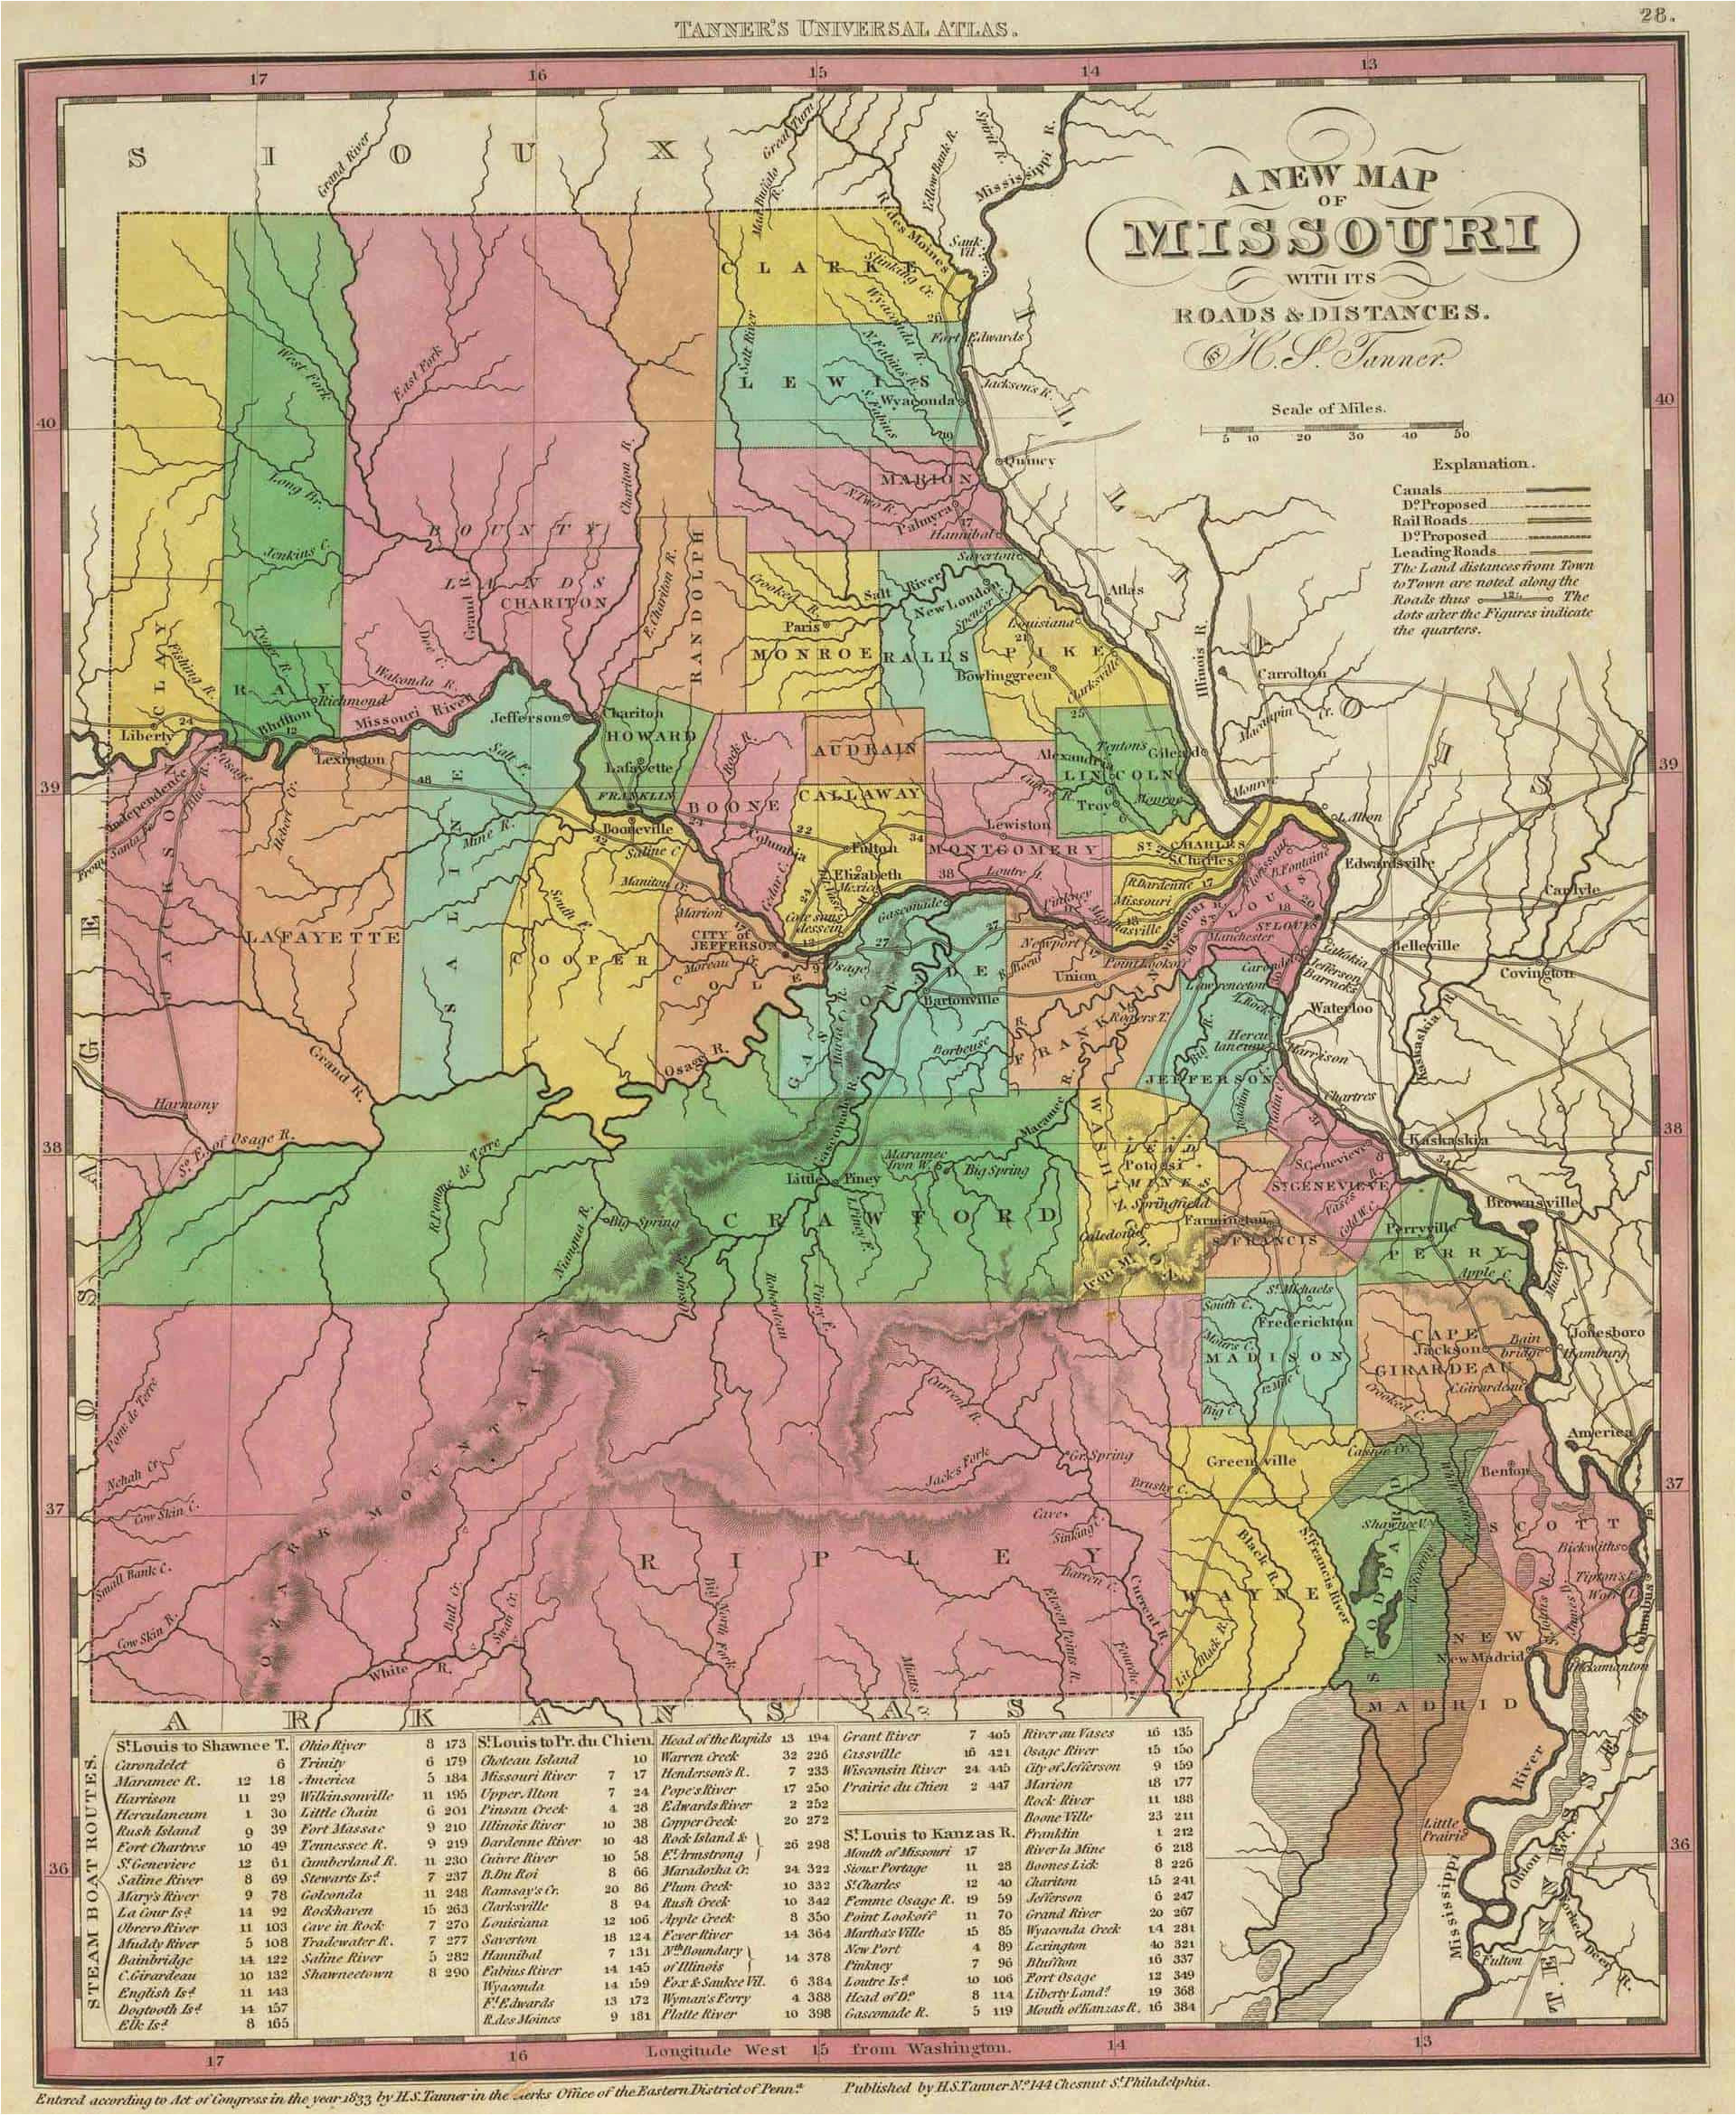 old historical city county and state maps of missouri